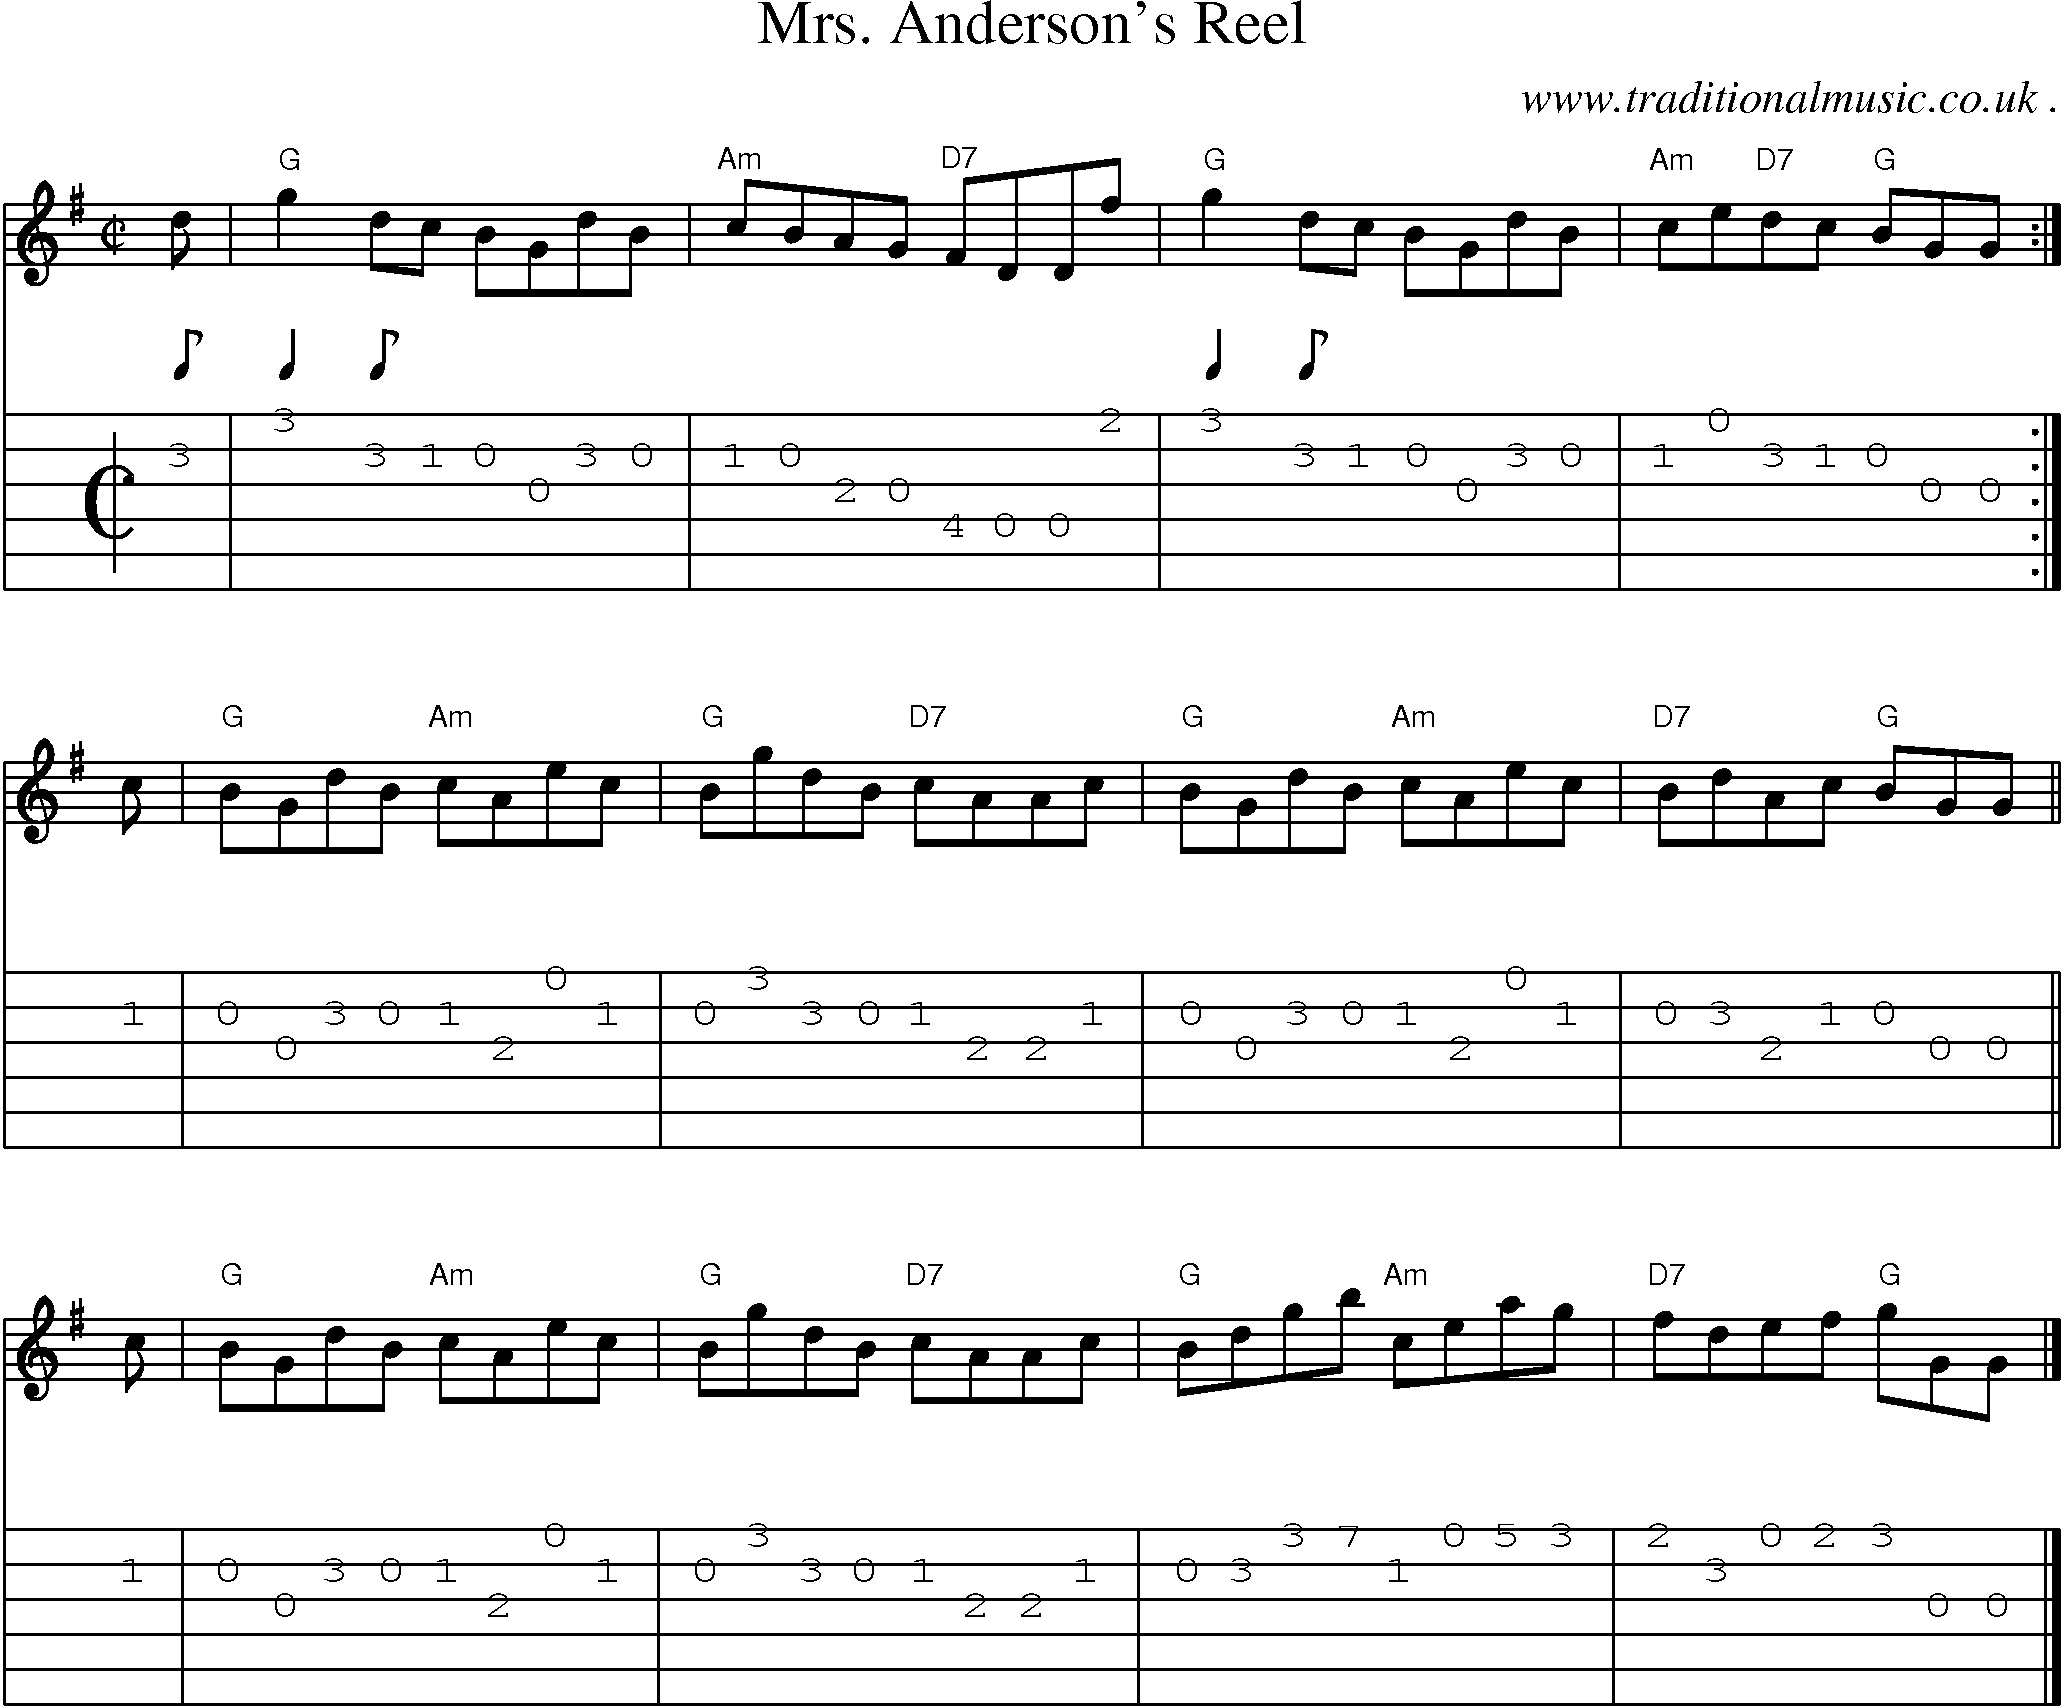 Sheet-music  score, Chords and Guitar Tabs for Mrs Andersons Reel